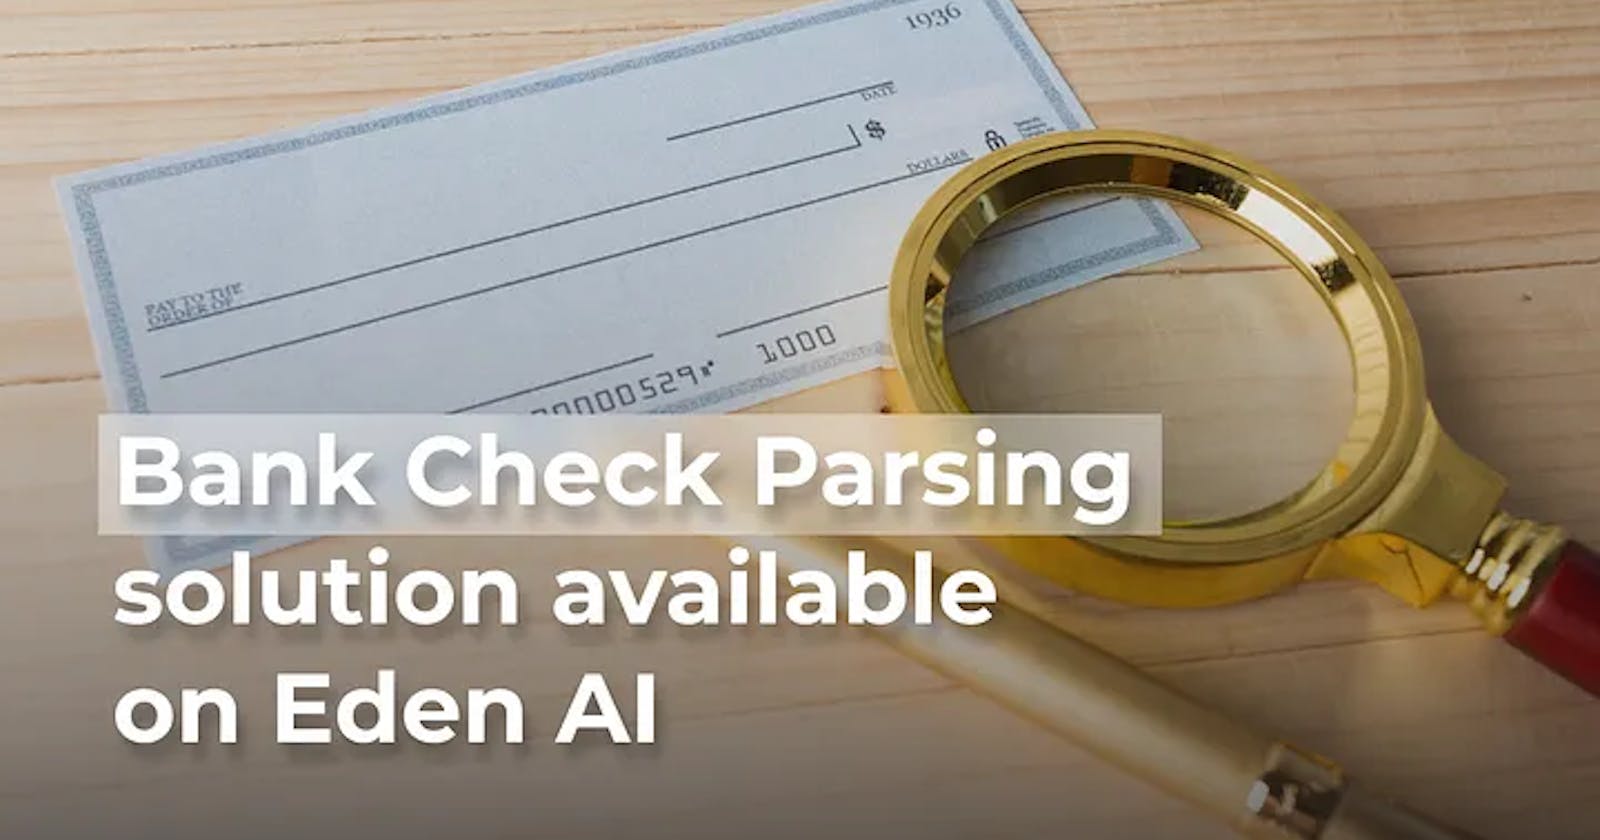 NEW: Bank Check Parser available on Eden AI